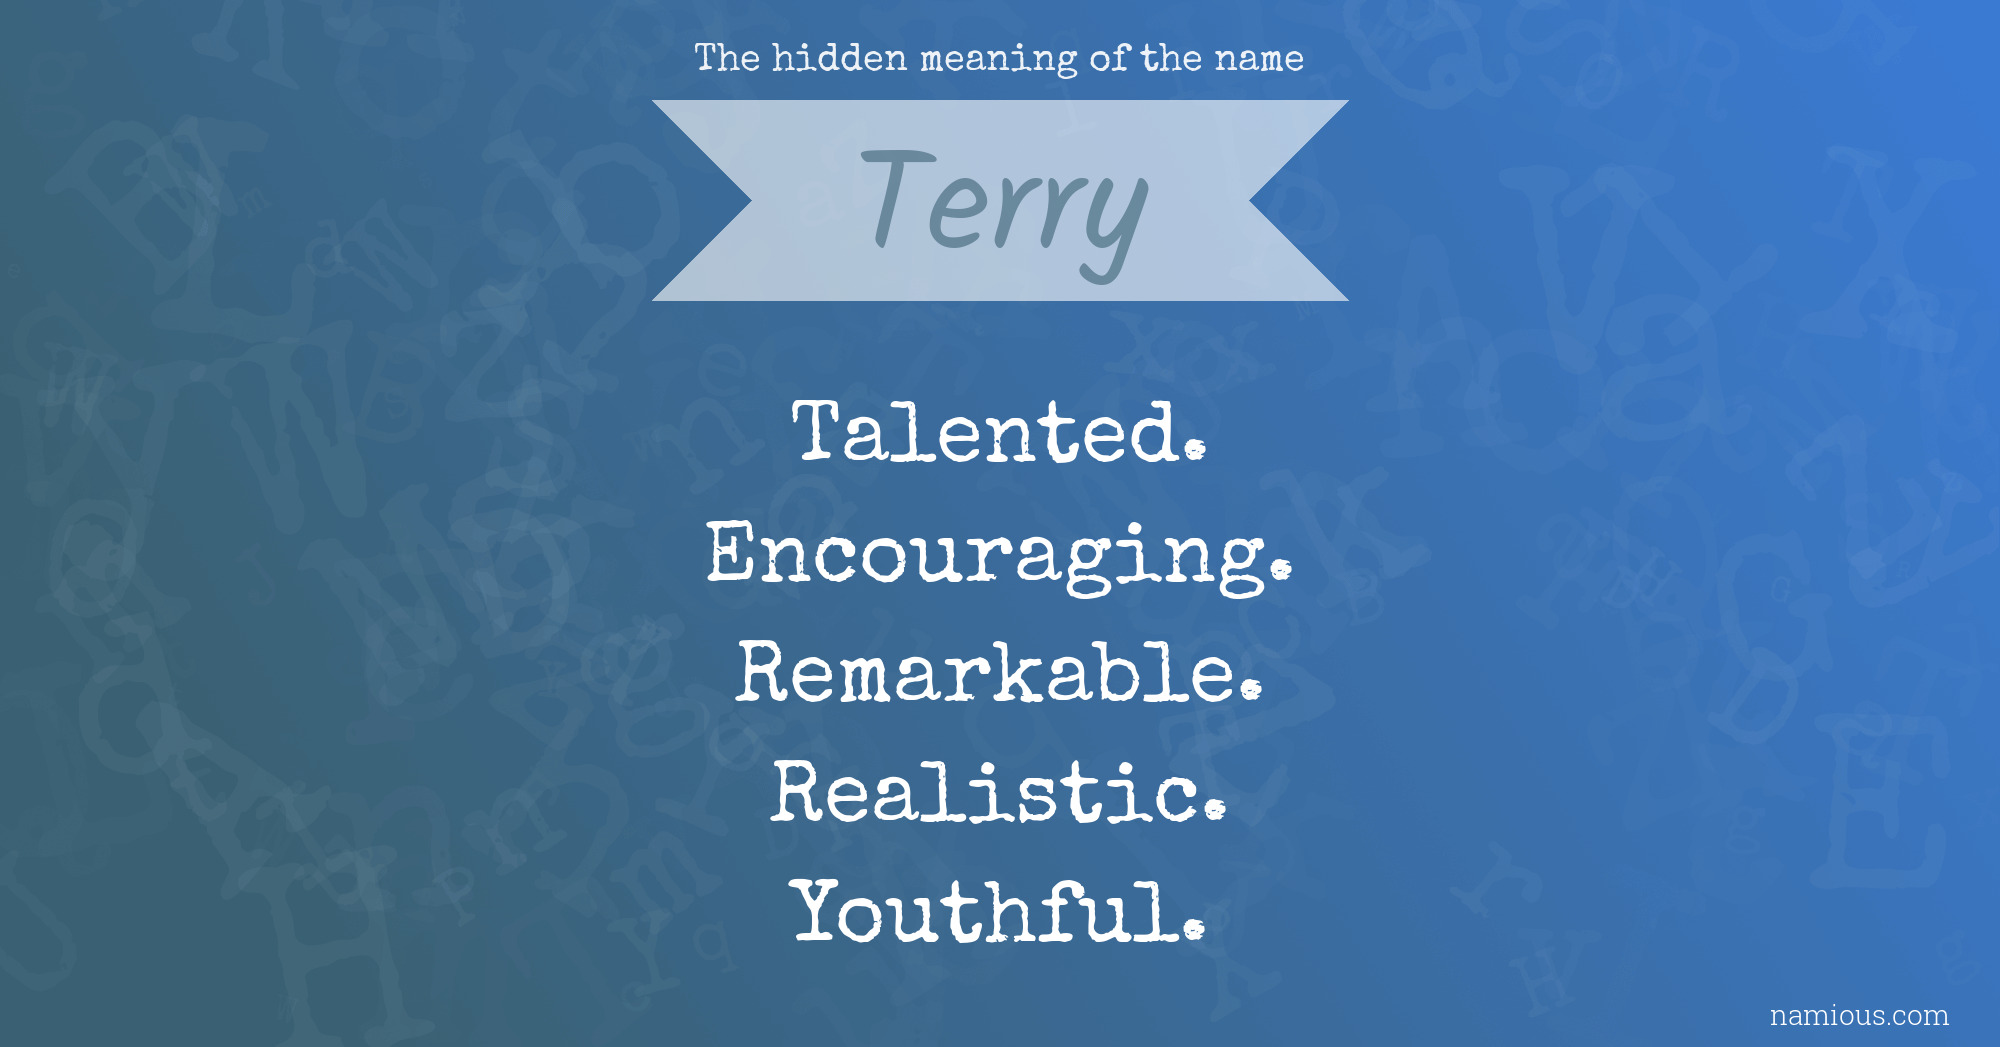 The hidden meaning of the name Terry